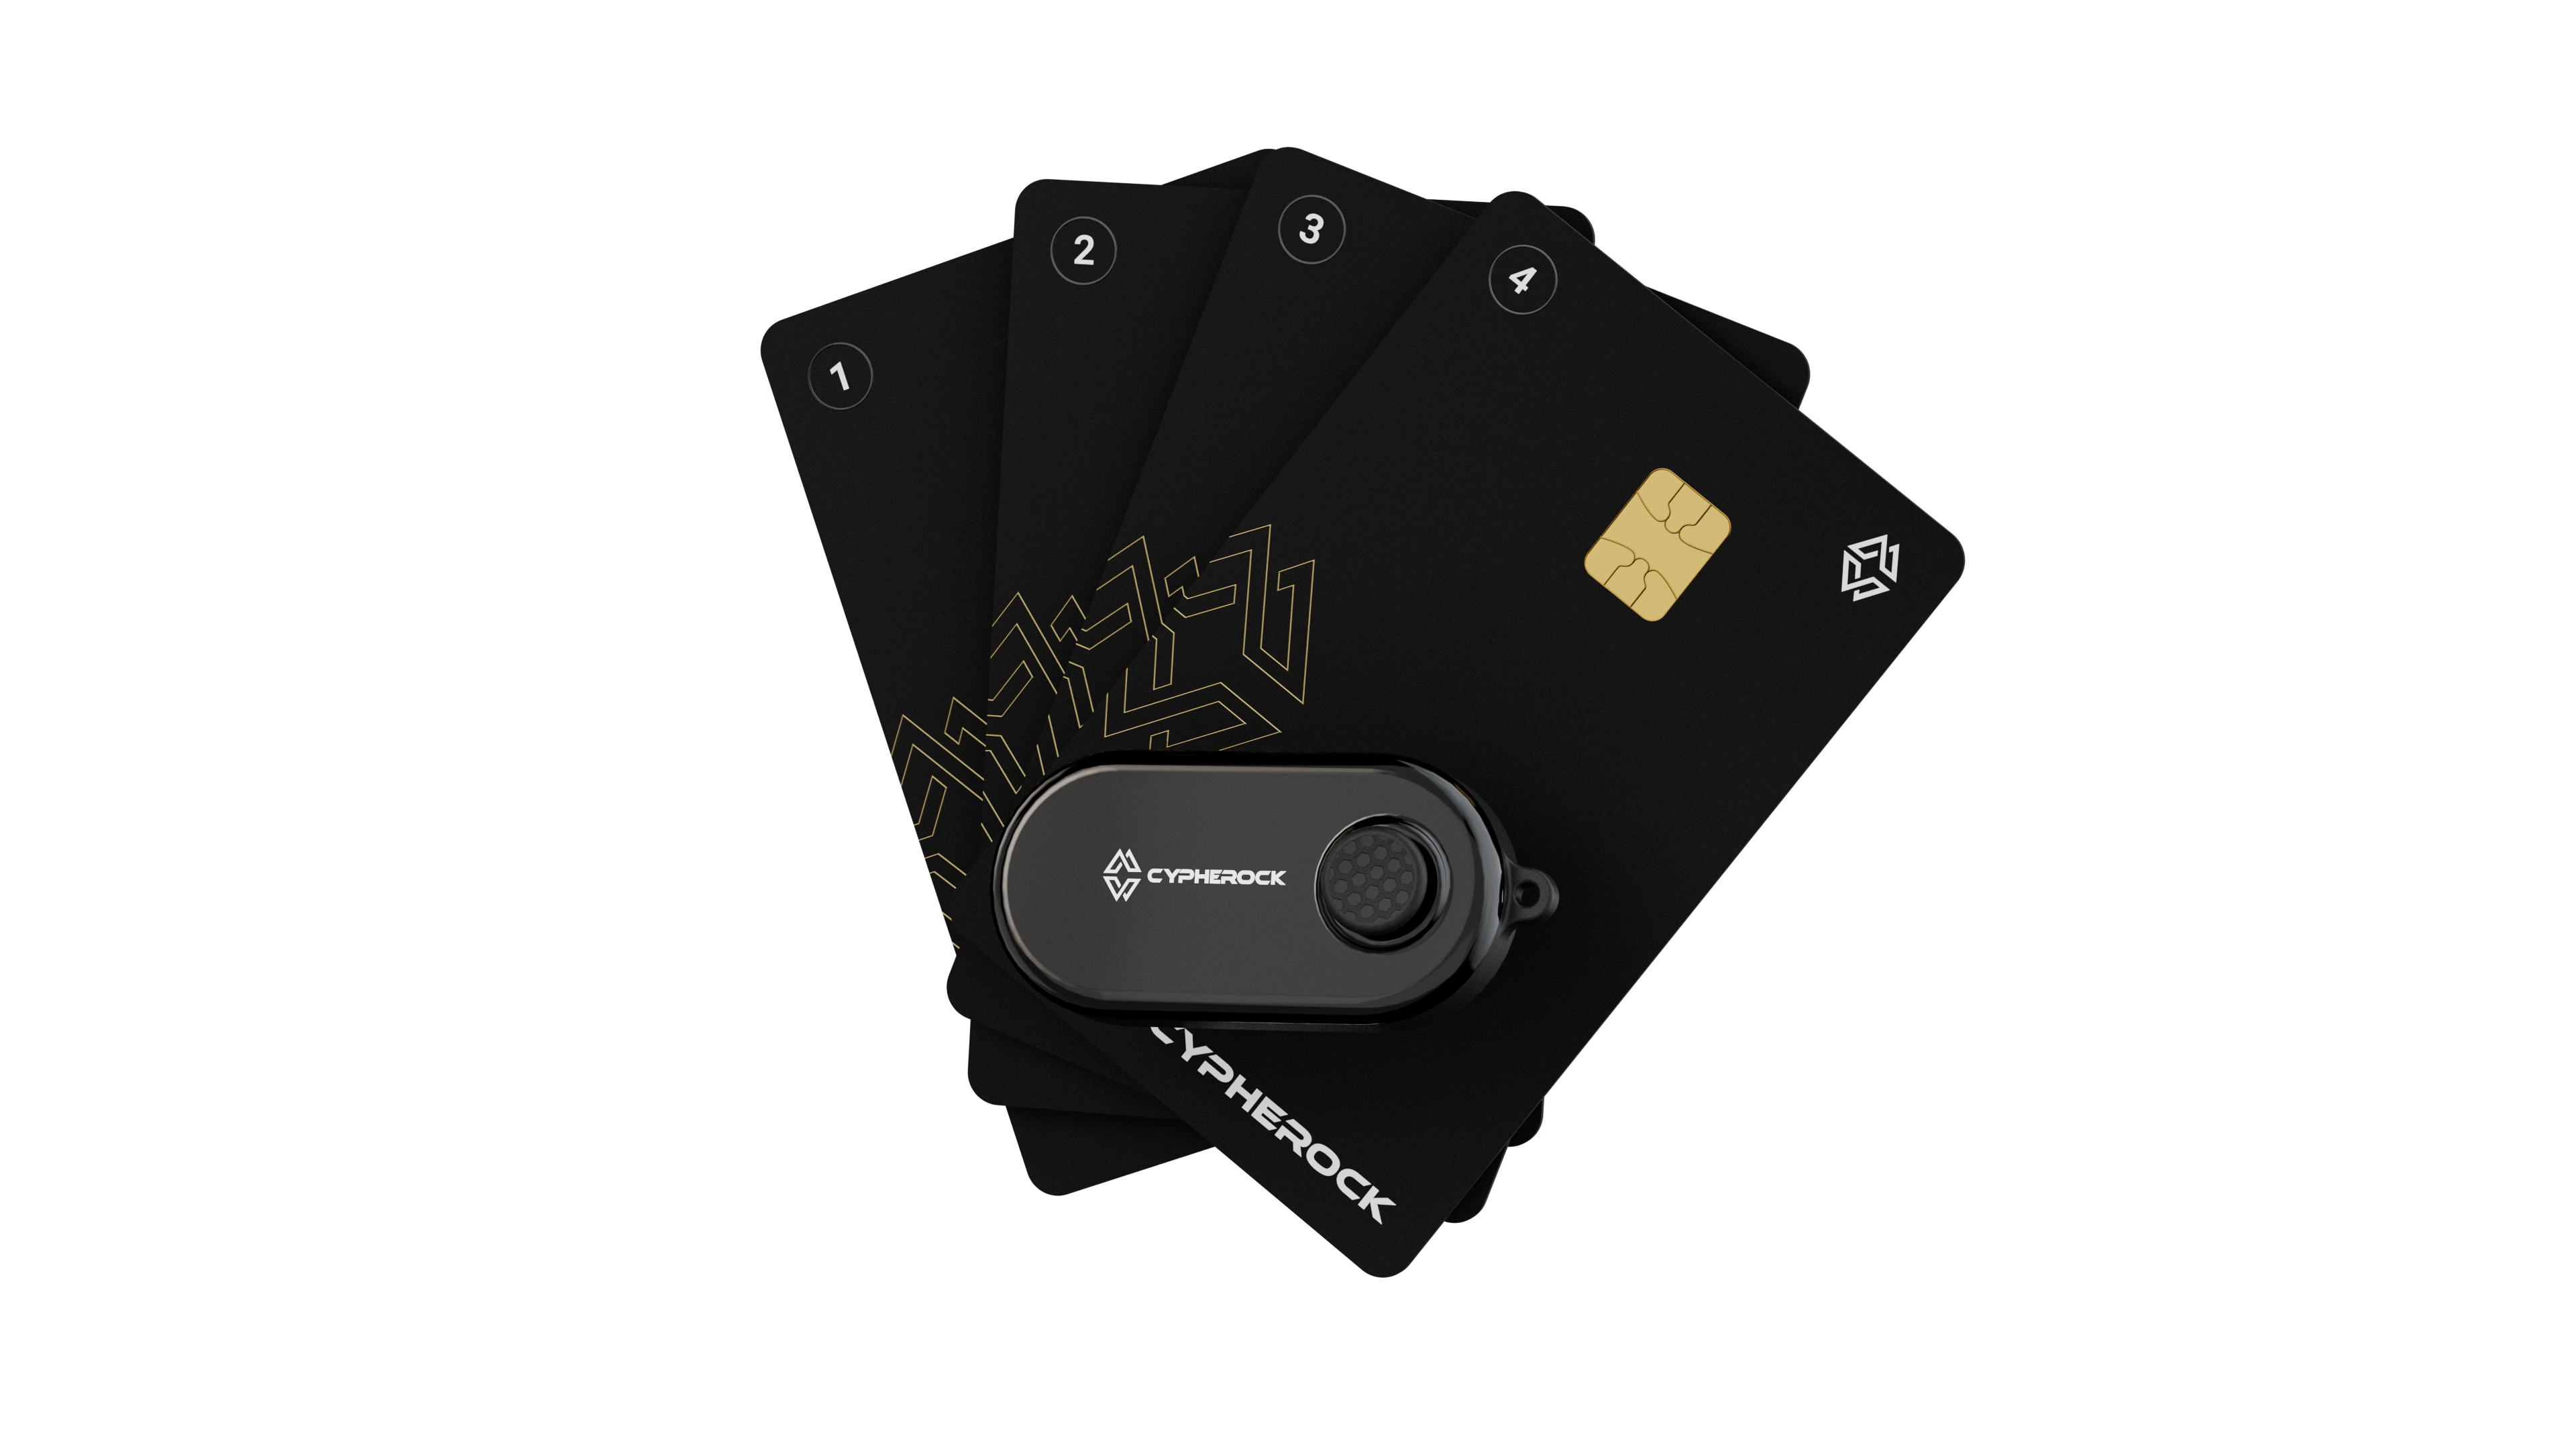 Trezor Model One - The Original Cryptocurrency Hardware Wallet, Bitcoin  Security, Store & Manage Over 7000 Coins & Tokens, Easy-to-Use Interface